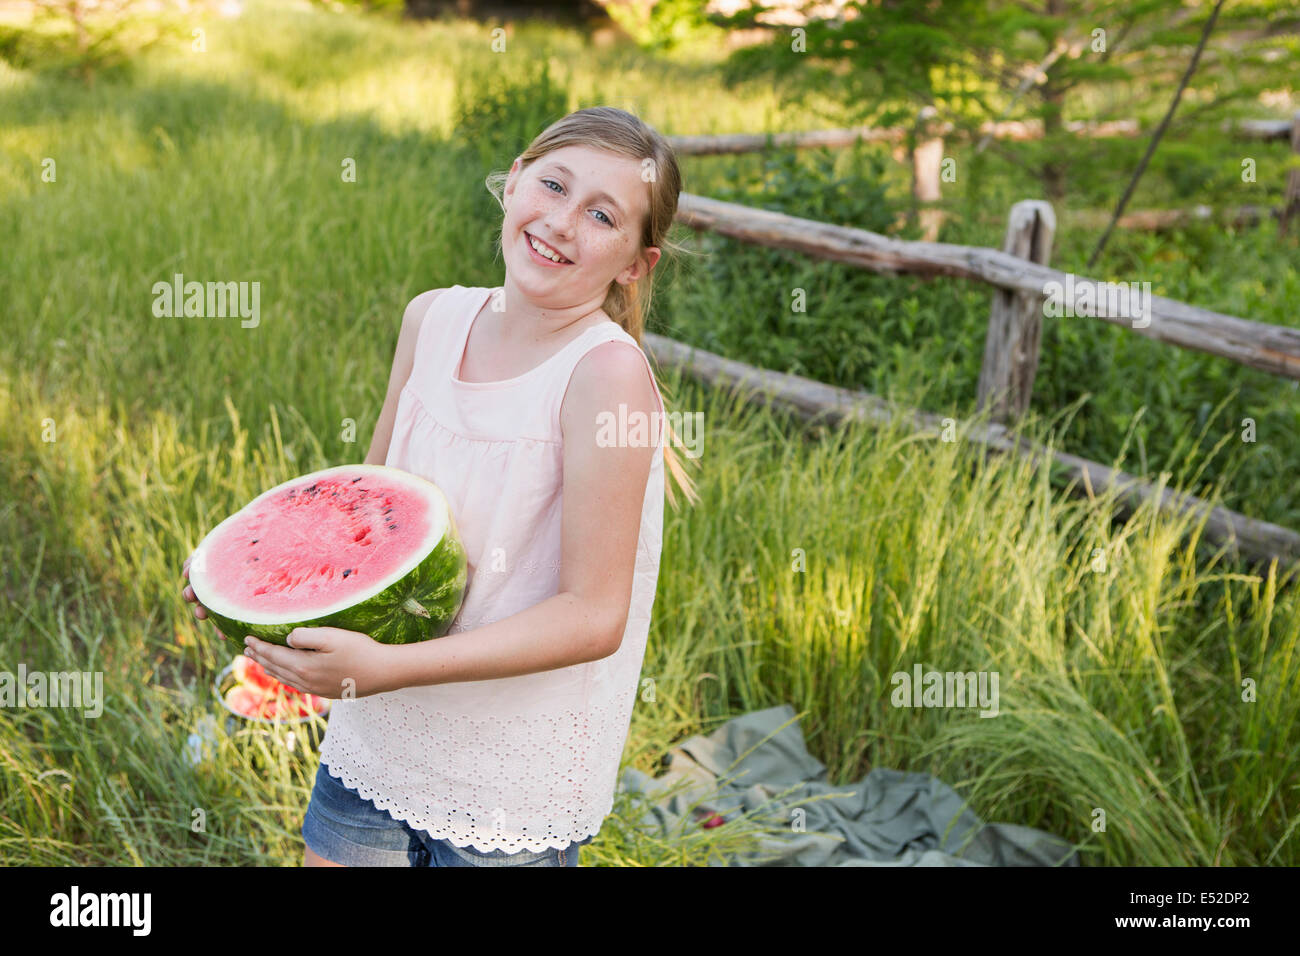 A child holding half a fresh water melon. Stock Photo